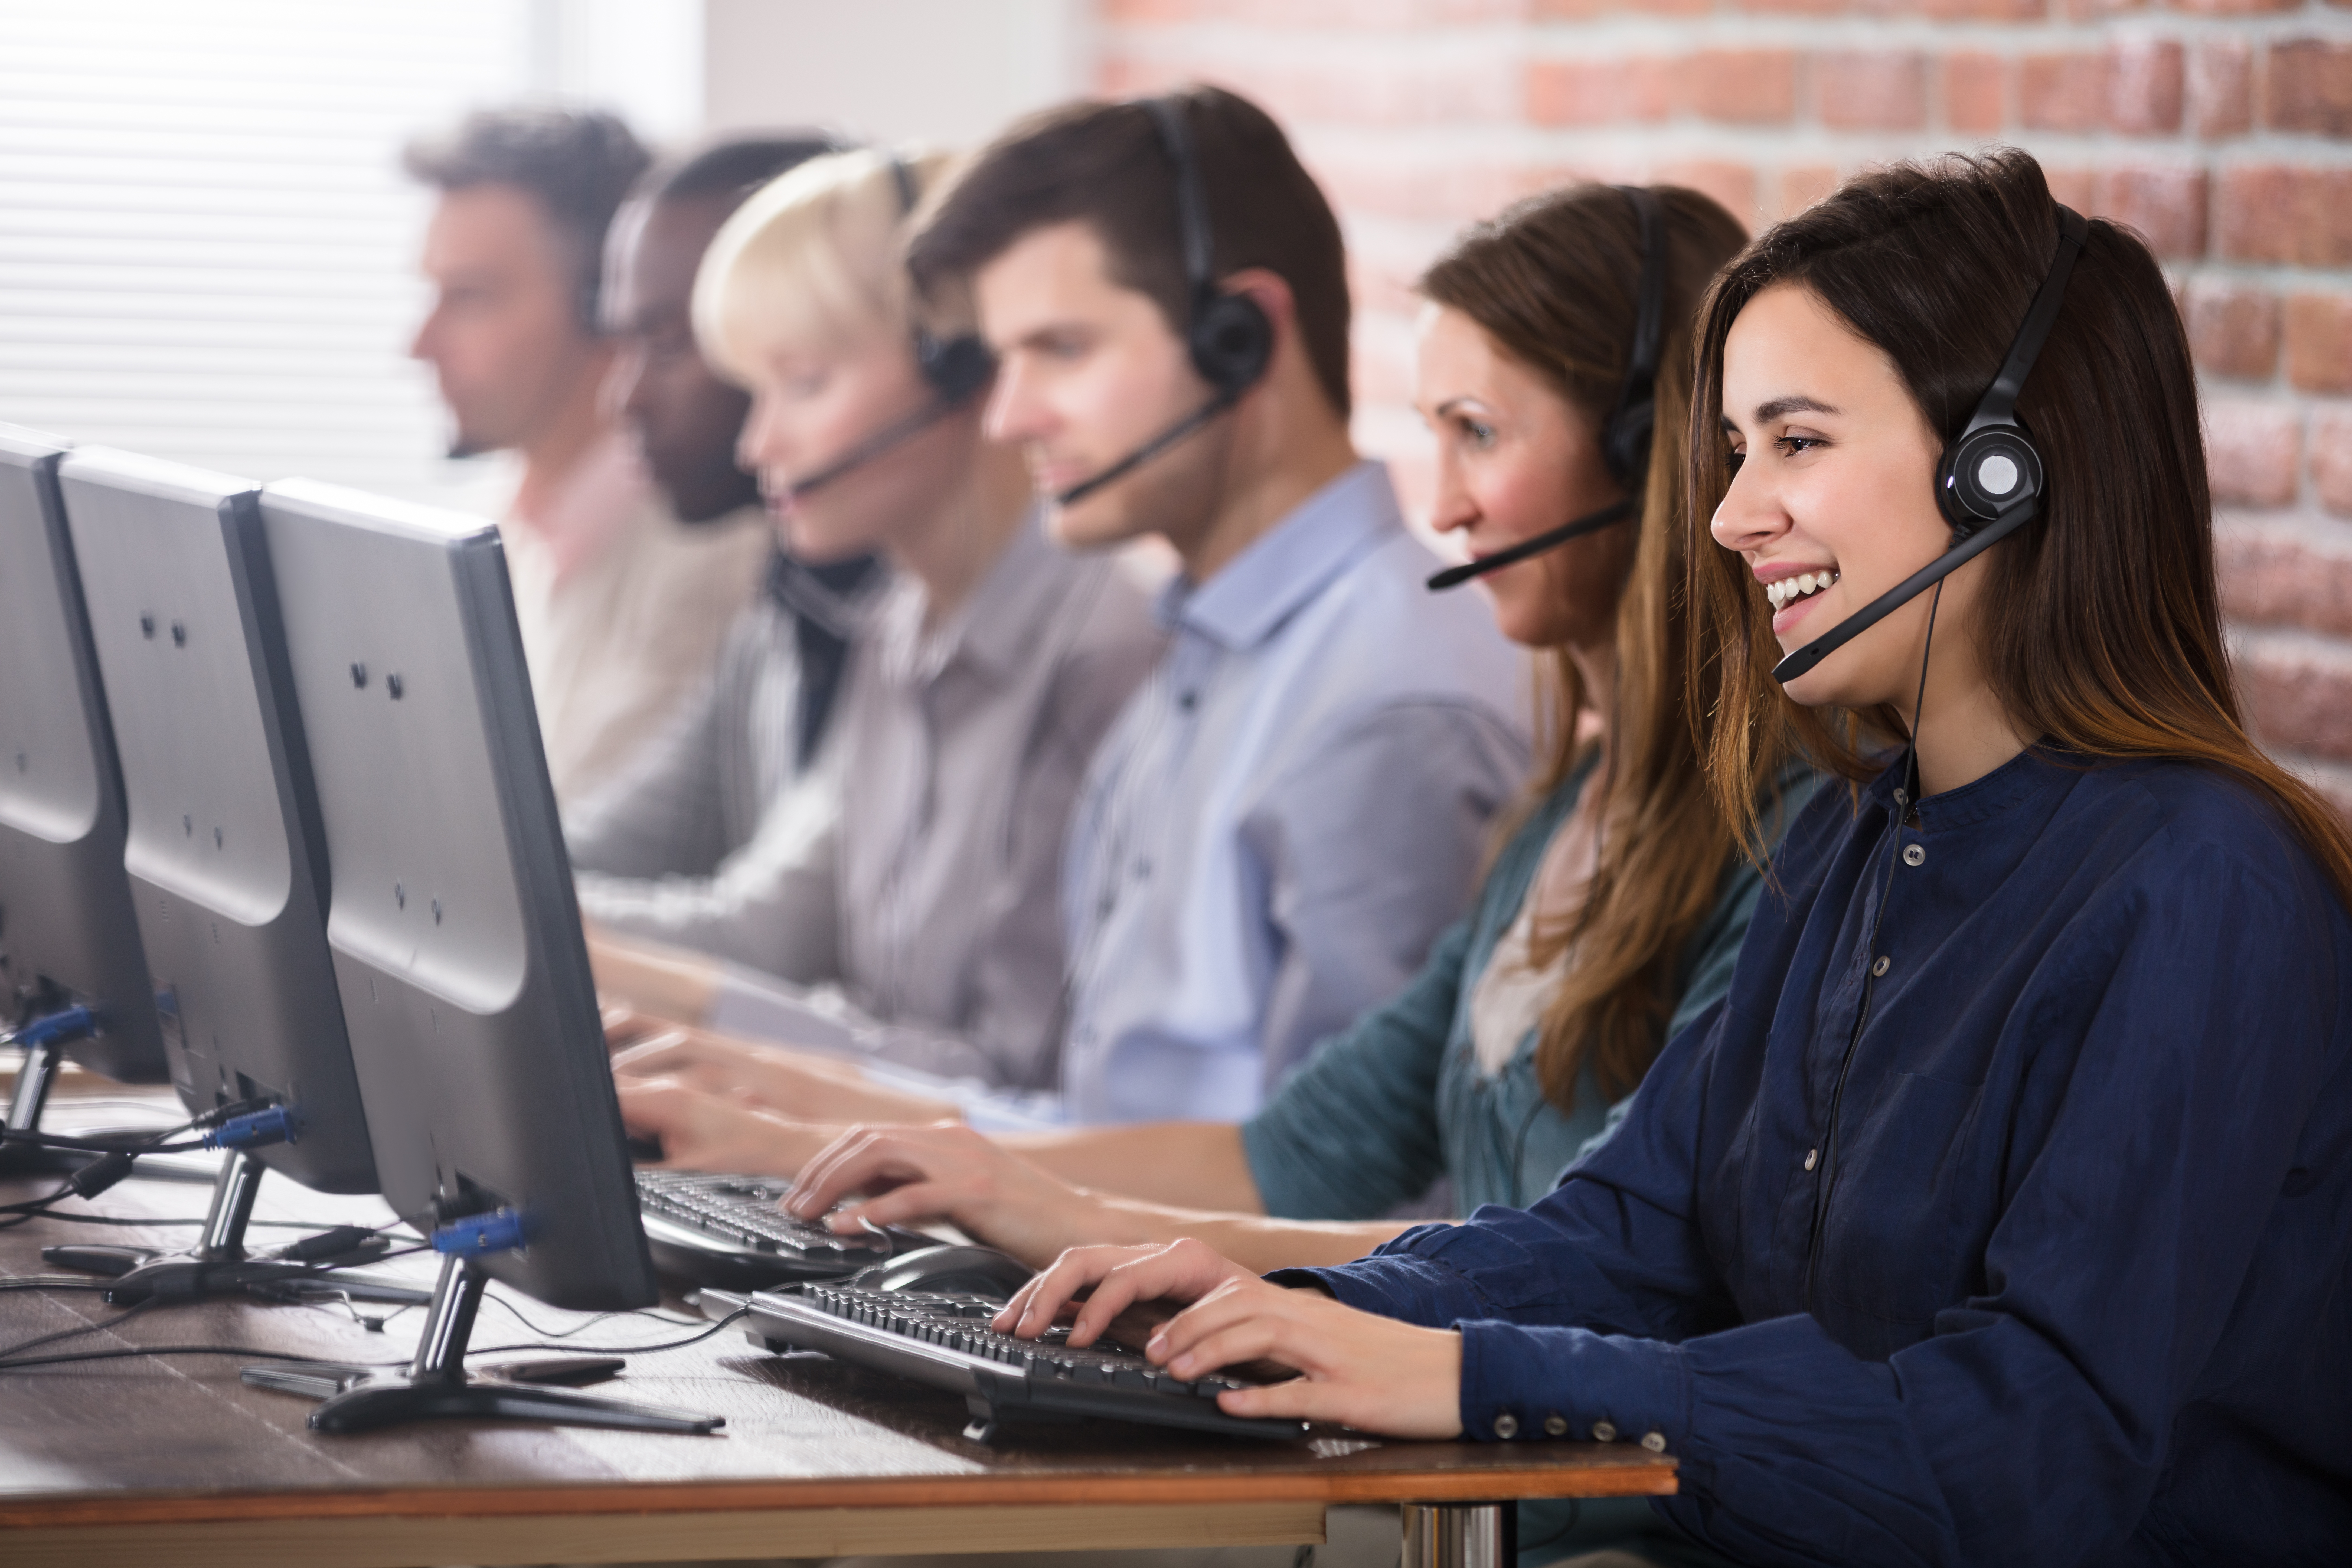 Customer service agents with headsets sitting in front of their computers in a row